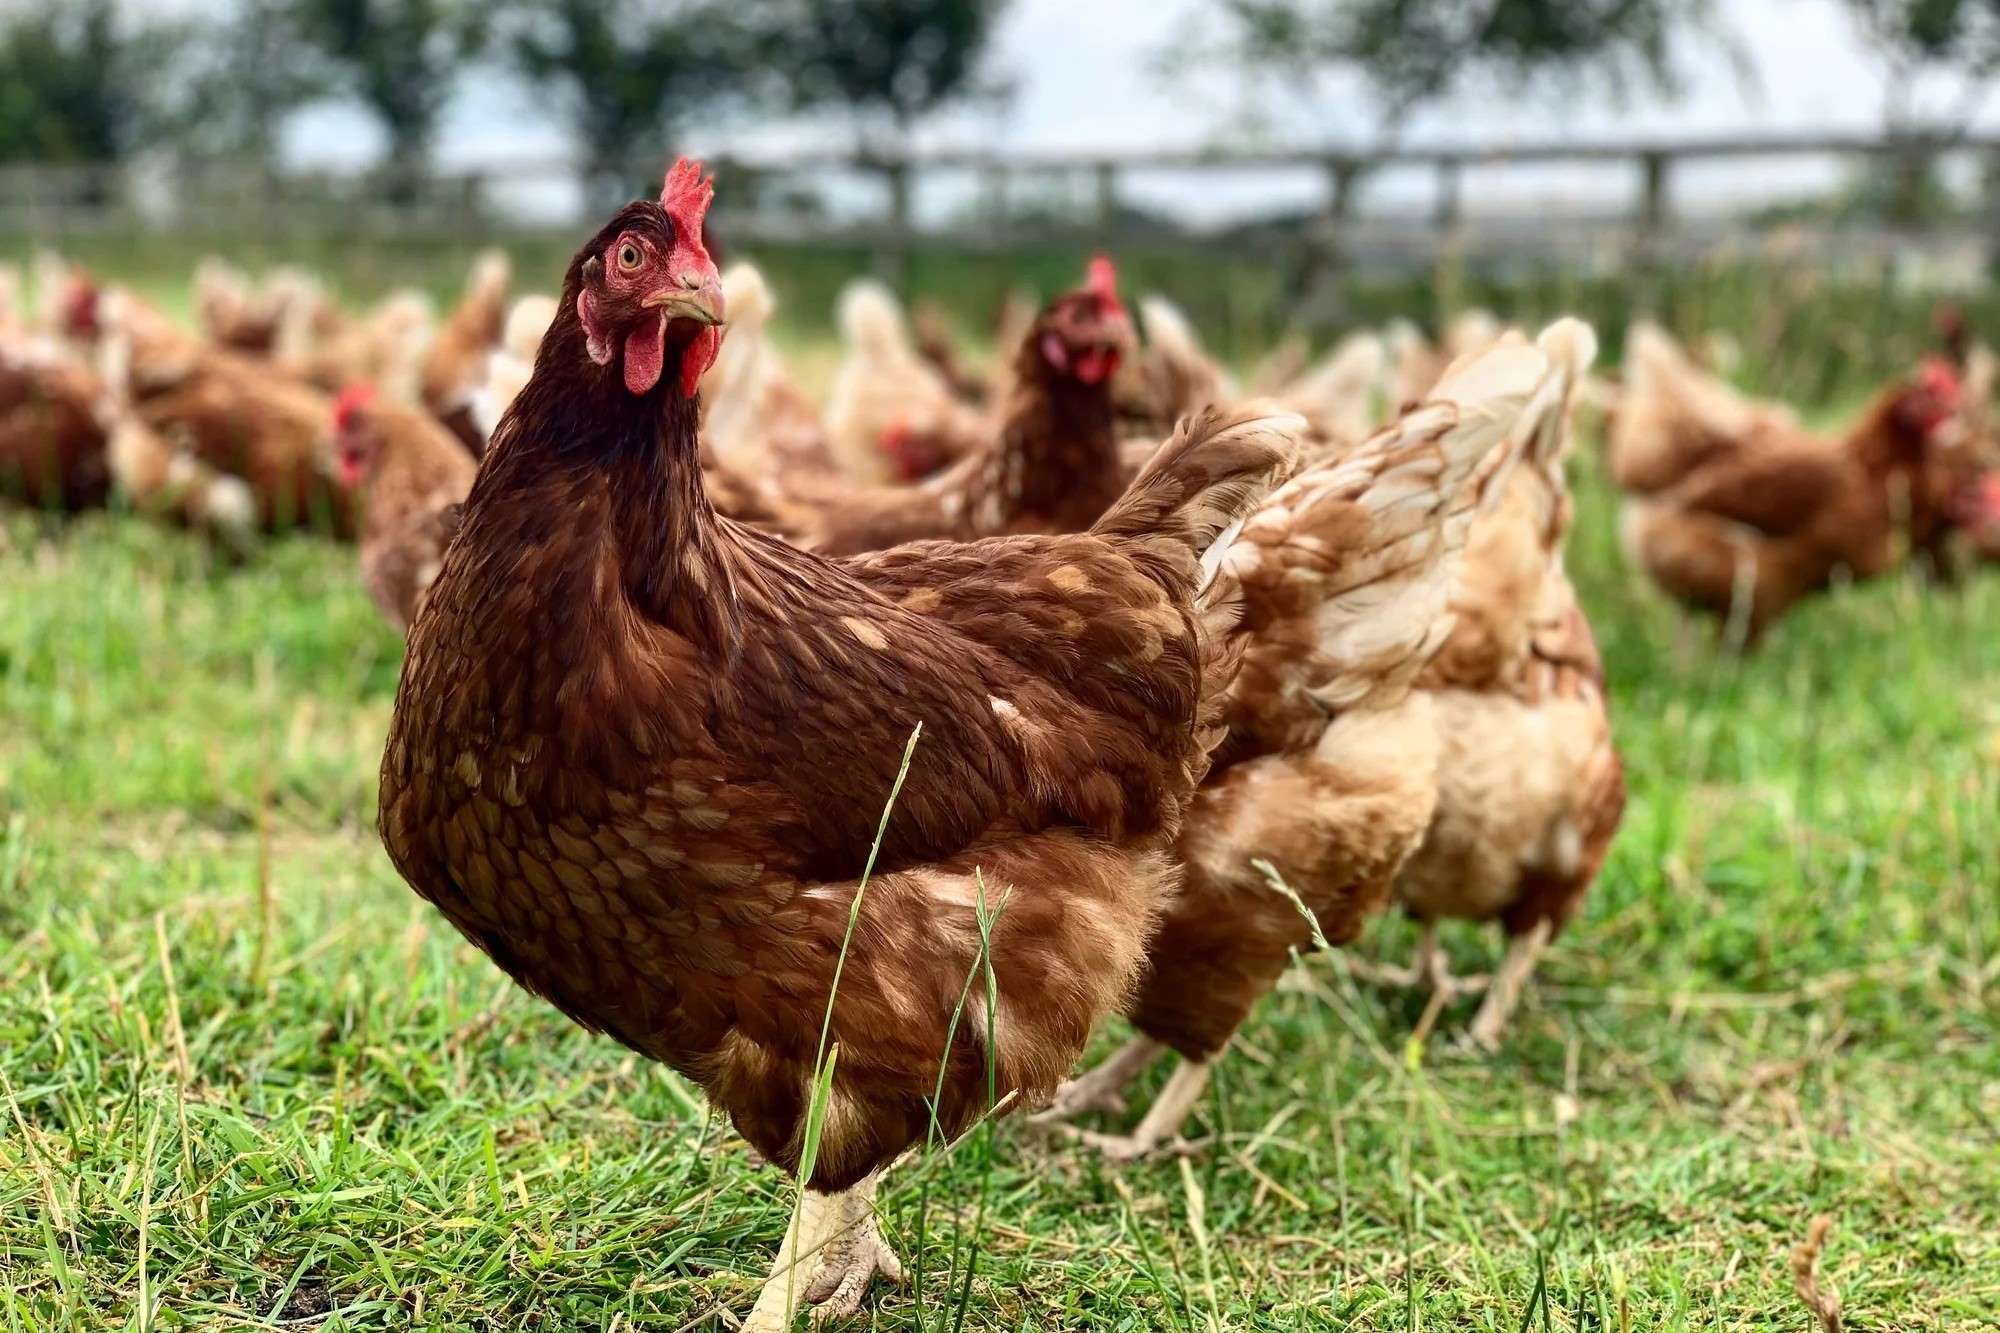 The Most Delicious And Juicy Chicken Breed Revealed!